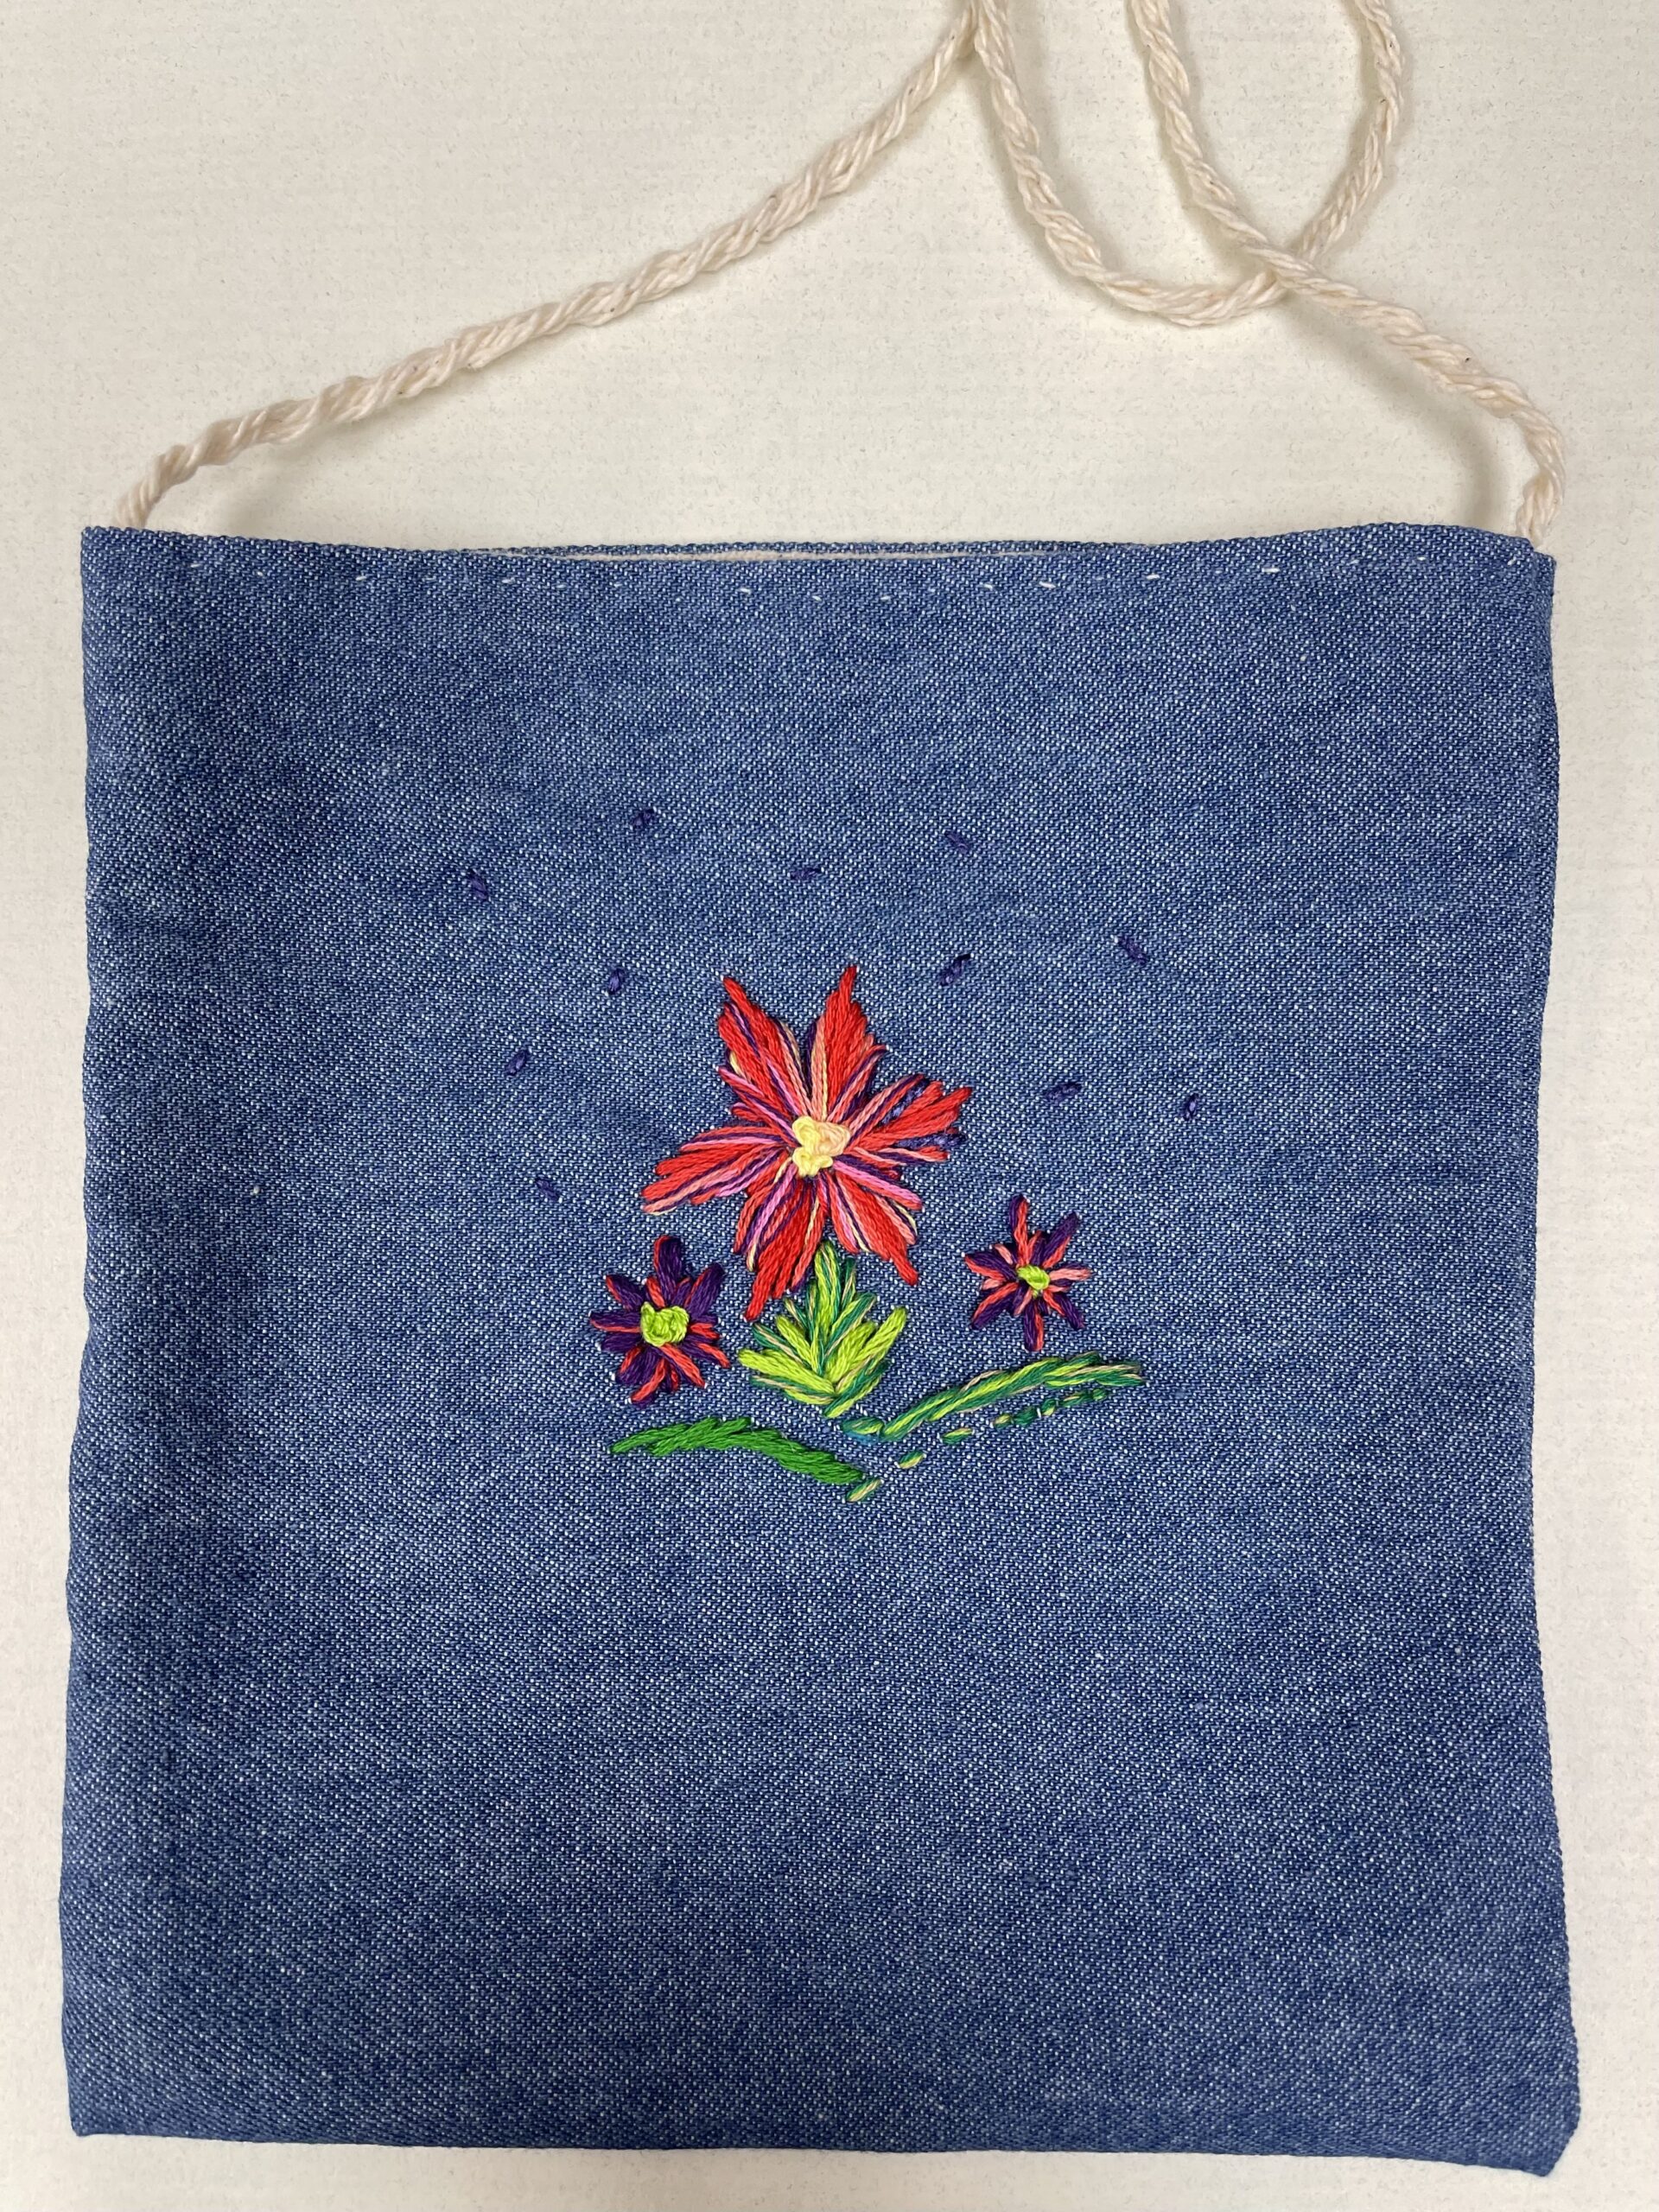 navy blue bag with an embroiered red and purple flower